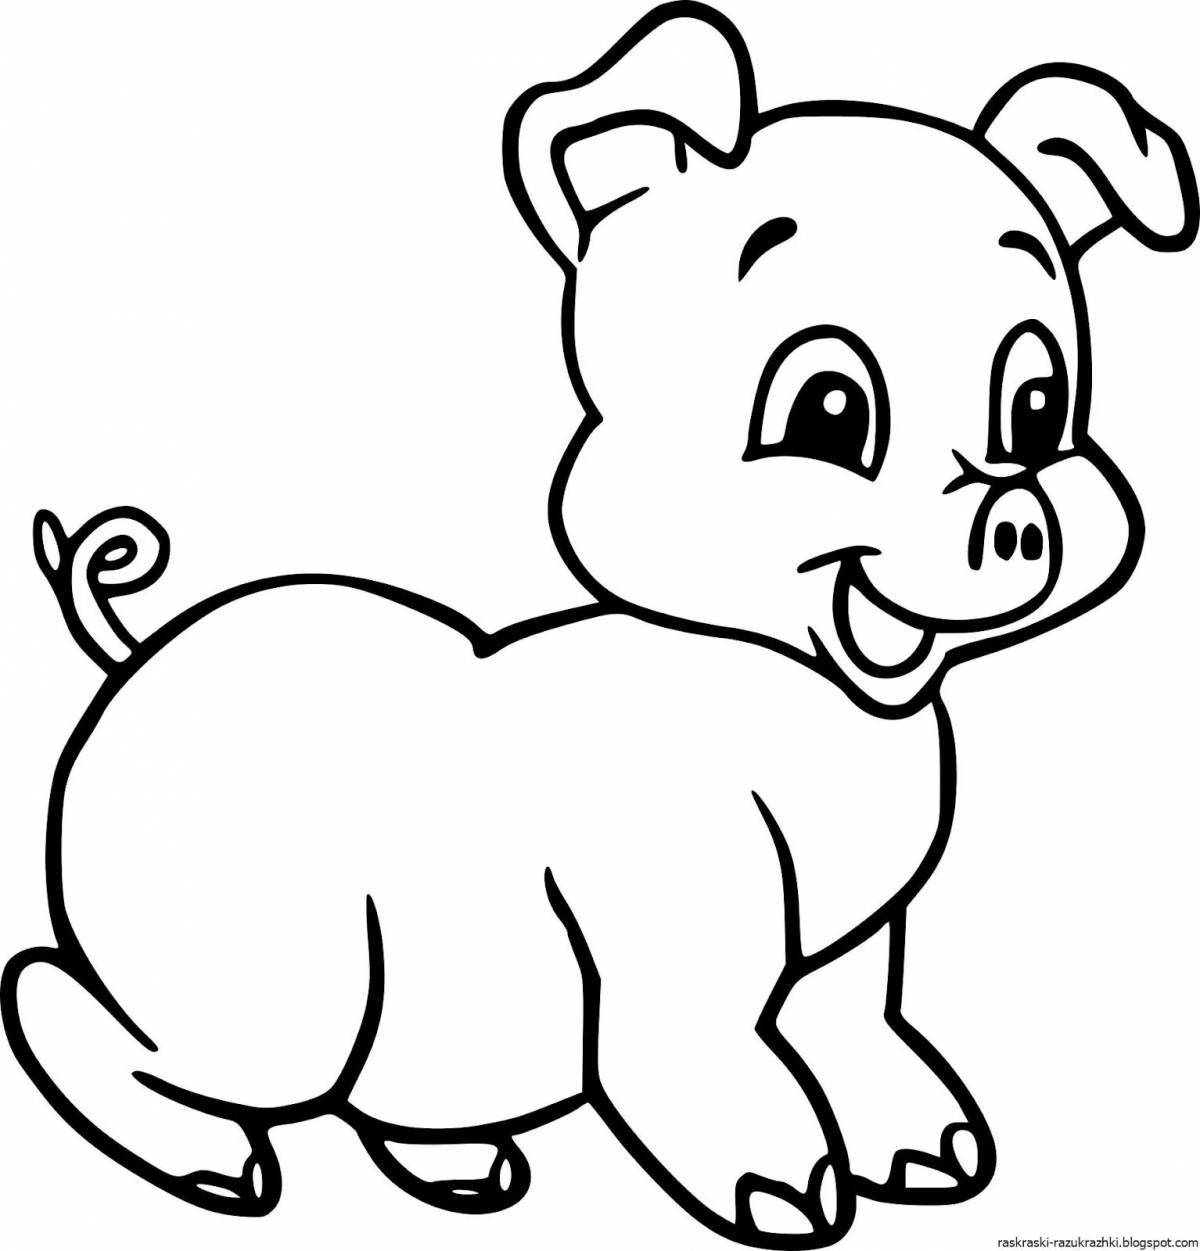 Humorous pig coloring for kids